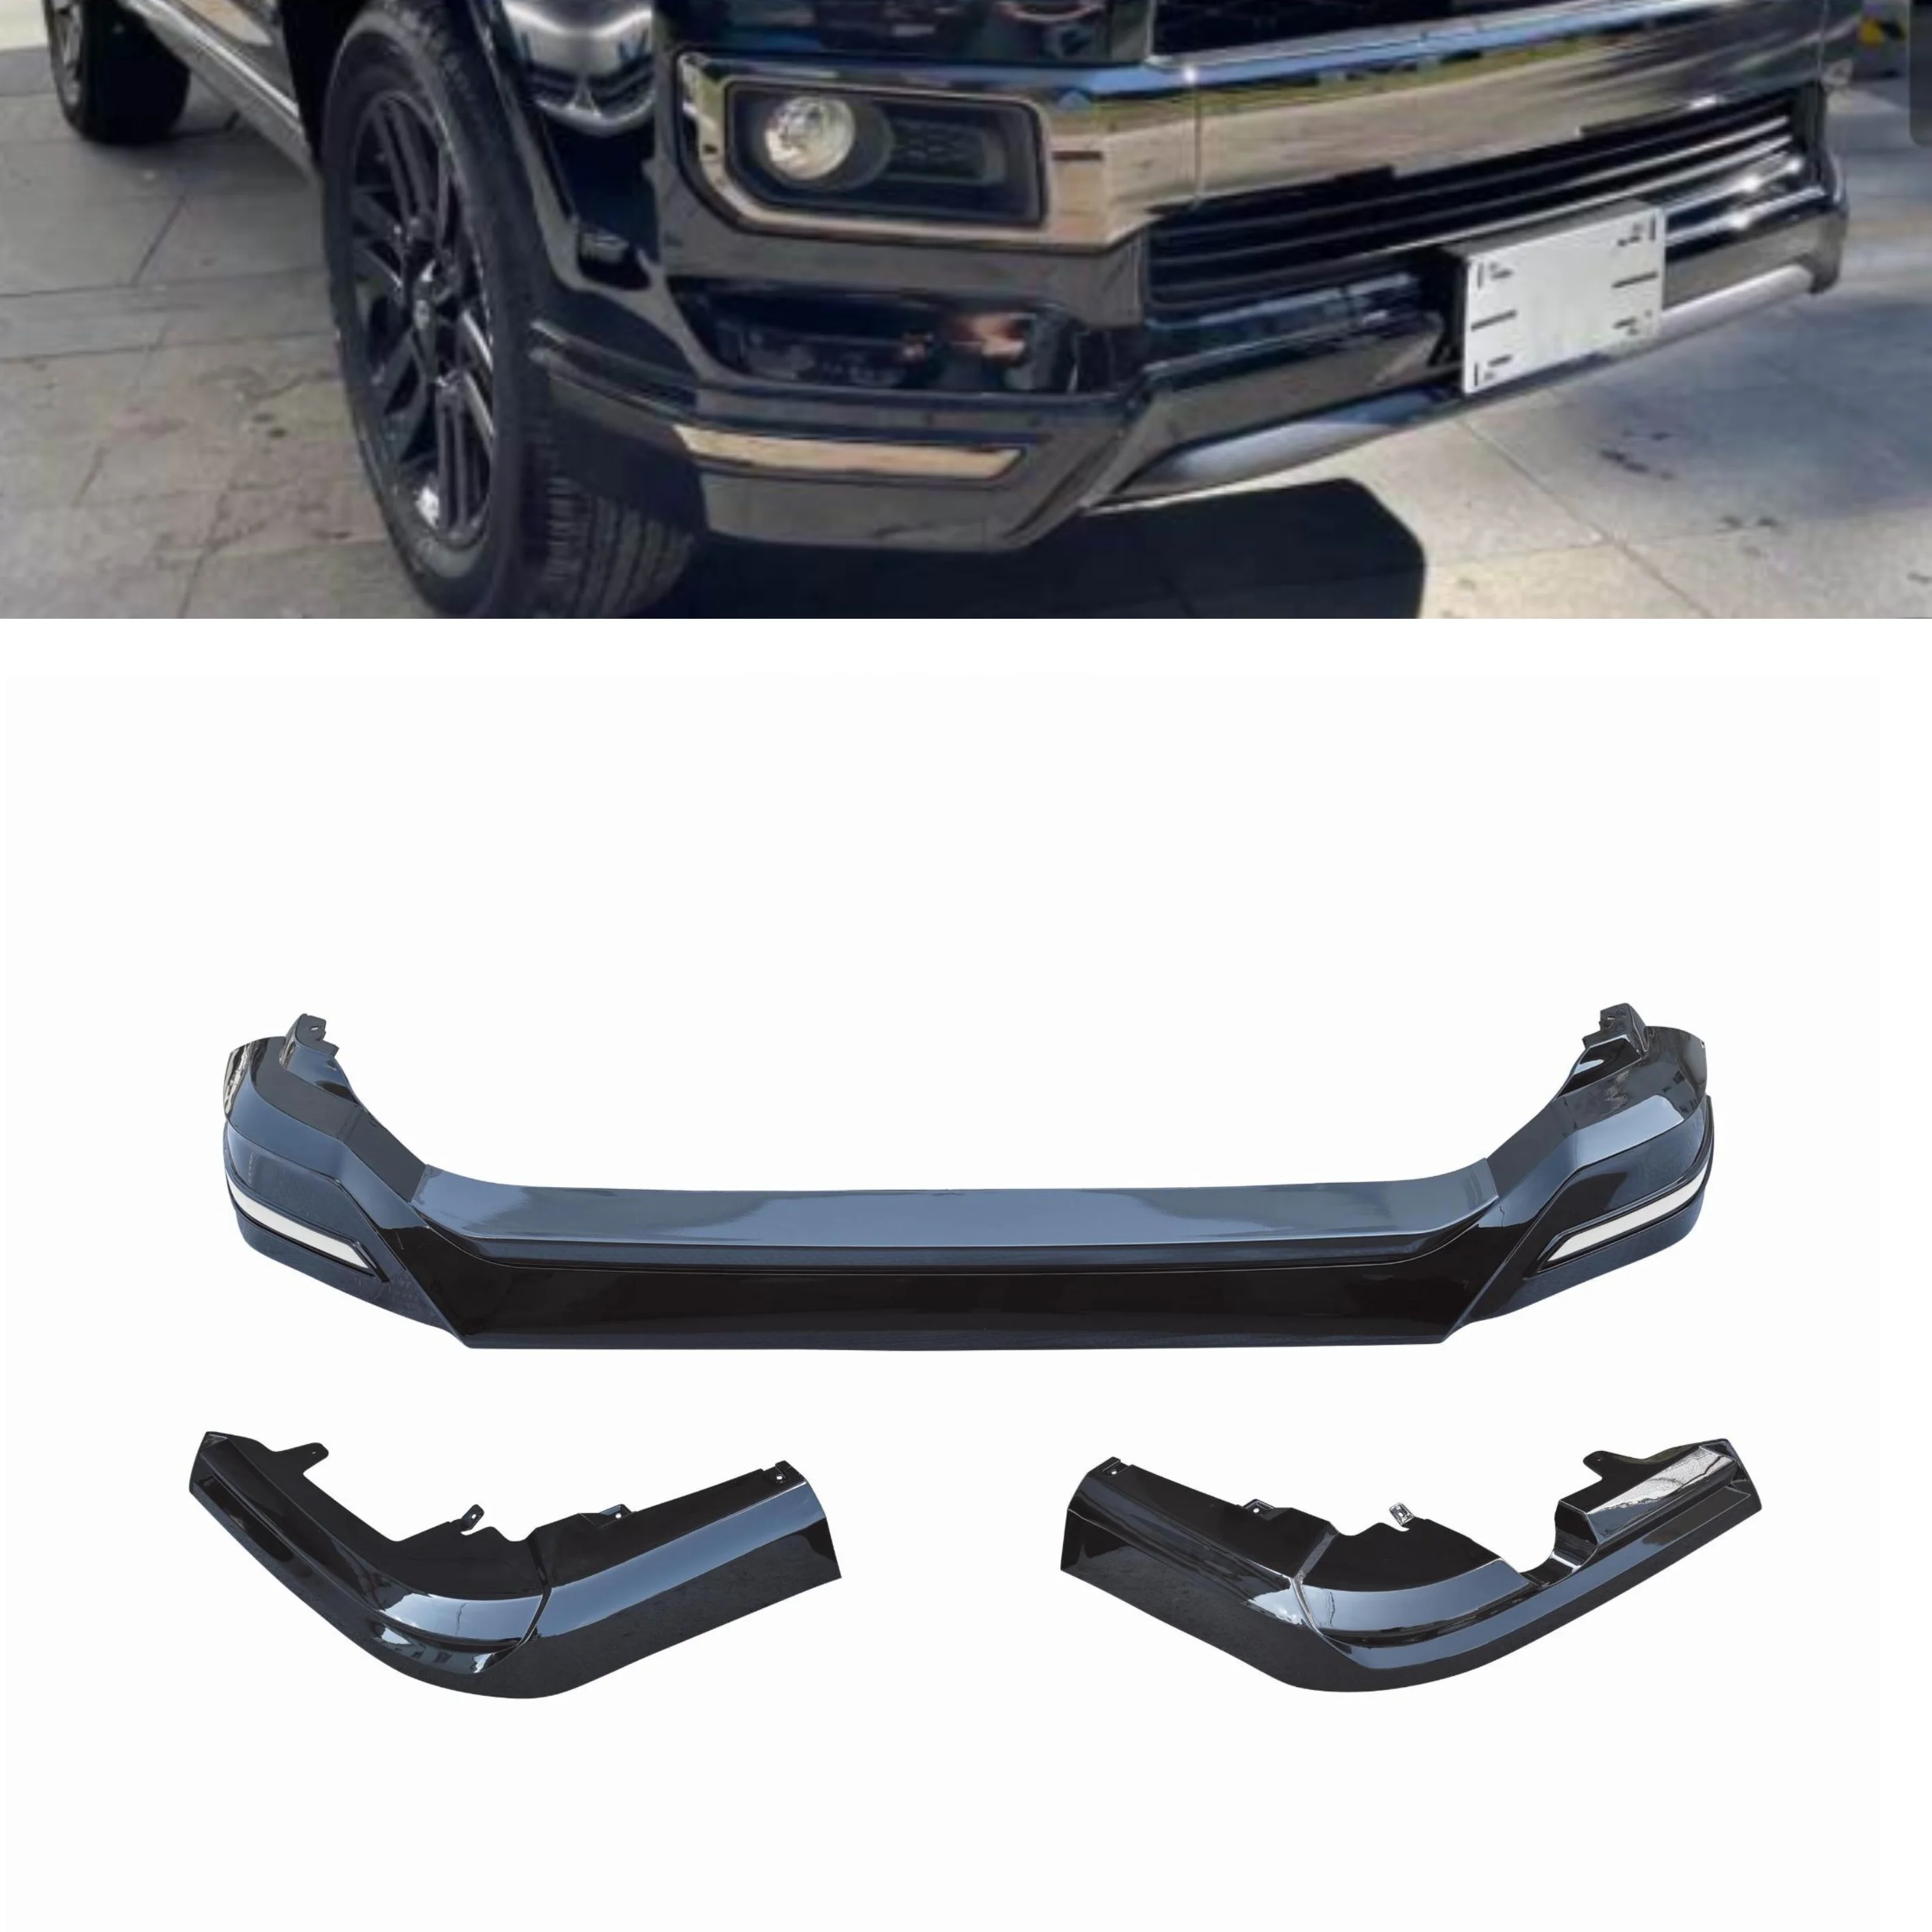 

MX FRONT BUMPER NIGHTSHADE TYPE UPGRADE FOR TOYOTA 4 RUNNER LIMITED 2014-2020 4RUNNER